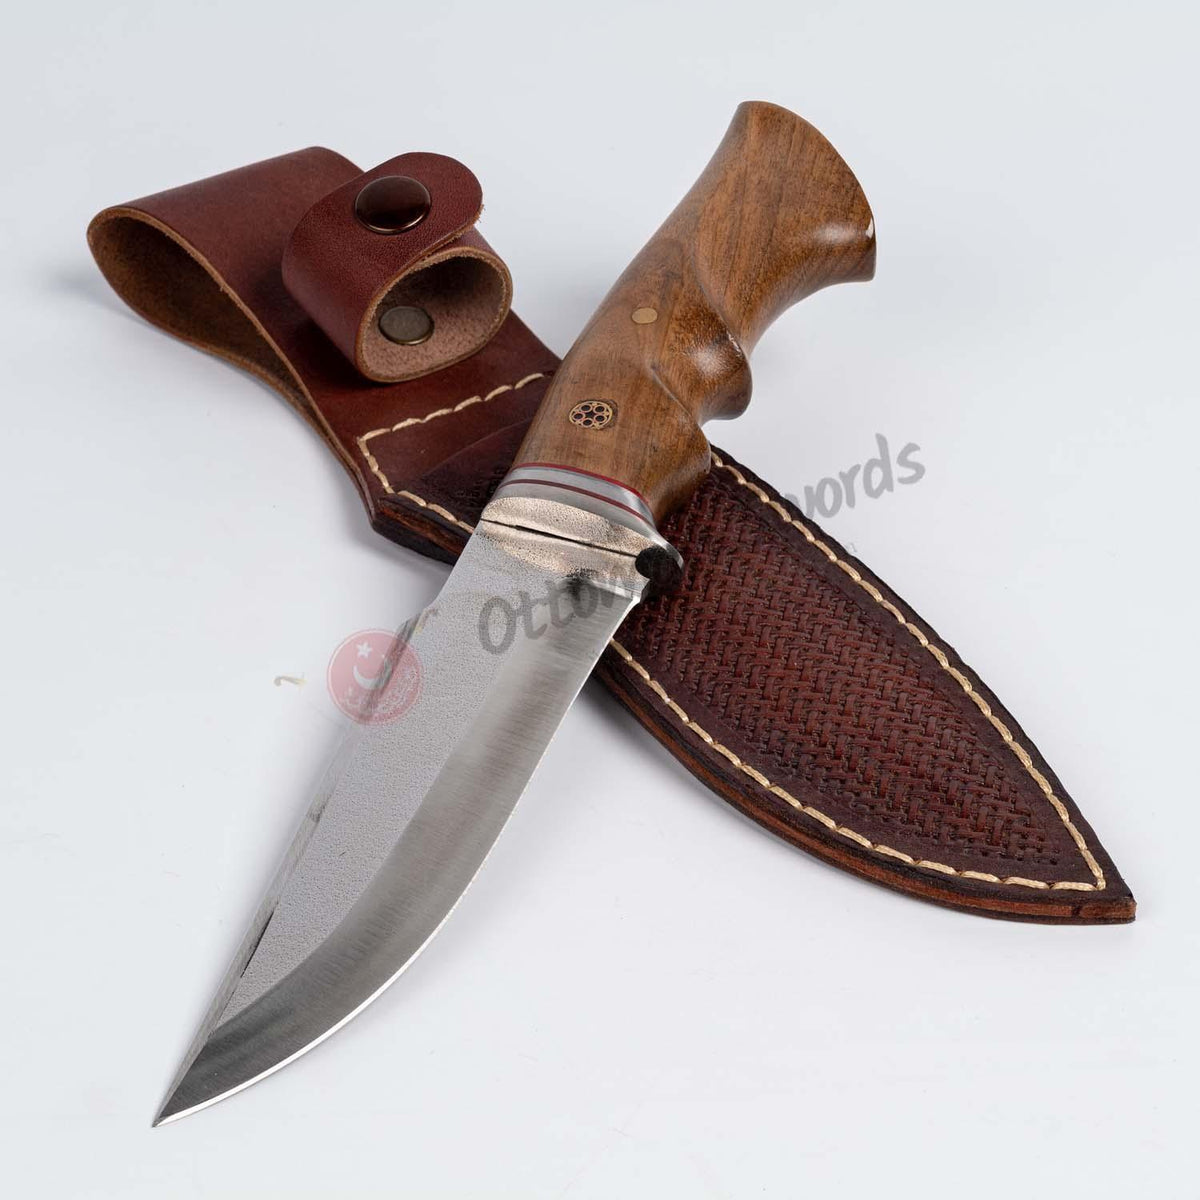 Bushcraft knife, Fixed Blade With Wooden Handle, Camping Gear 11 (5)